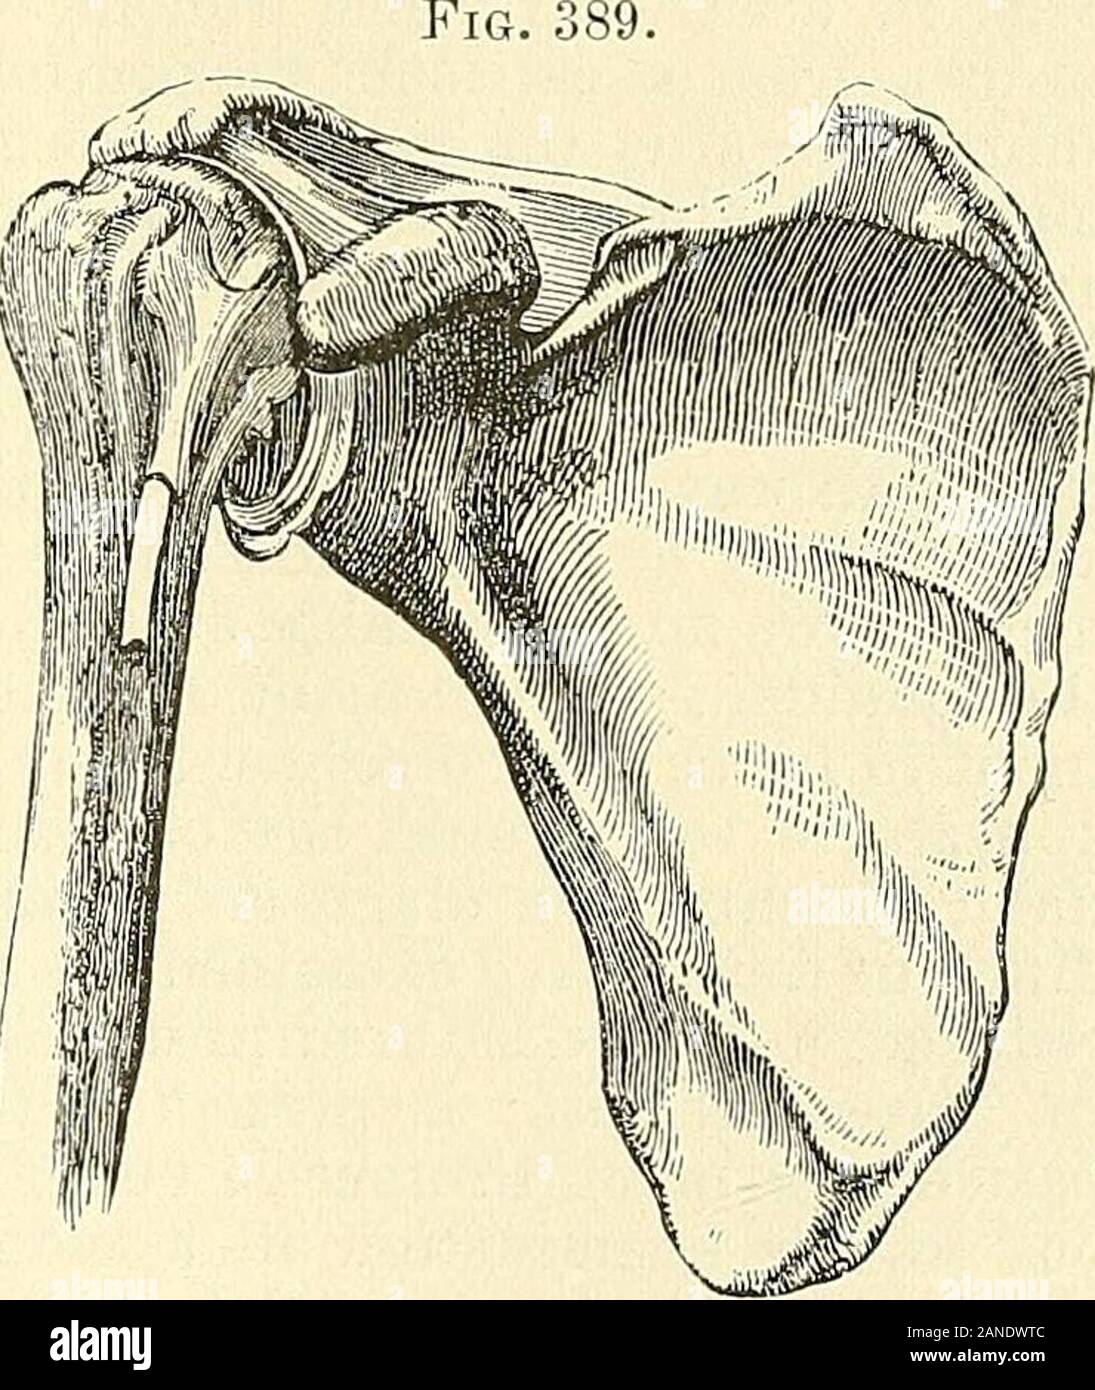 A practical treatise on fractures and dislocations . a num-ber of dissections, is to allow the headof the humerus to be drawn upwardand forward in its socket, until it isarrested by the two processes, and bythe coraco-acromial ligament. SaysMr. Soden : To enable the bone tomaintain its equilibrium, it is neces-sary that the capsular muscles shouldexactly counterbalance each other;and as there is no muscle from the ribs to the humerus to antagonizethe upper capsular muscles (that is, to draw the head of the humerusdownward), it is suggested that this office is performed by the singularcourse of Stock Photo